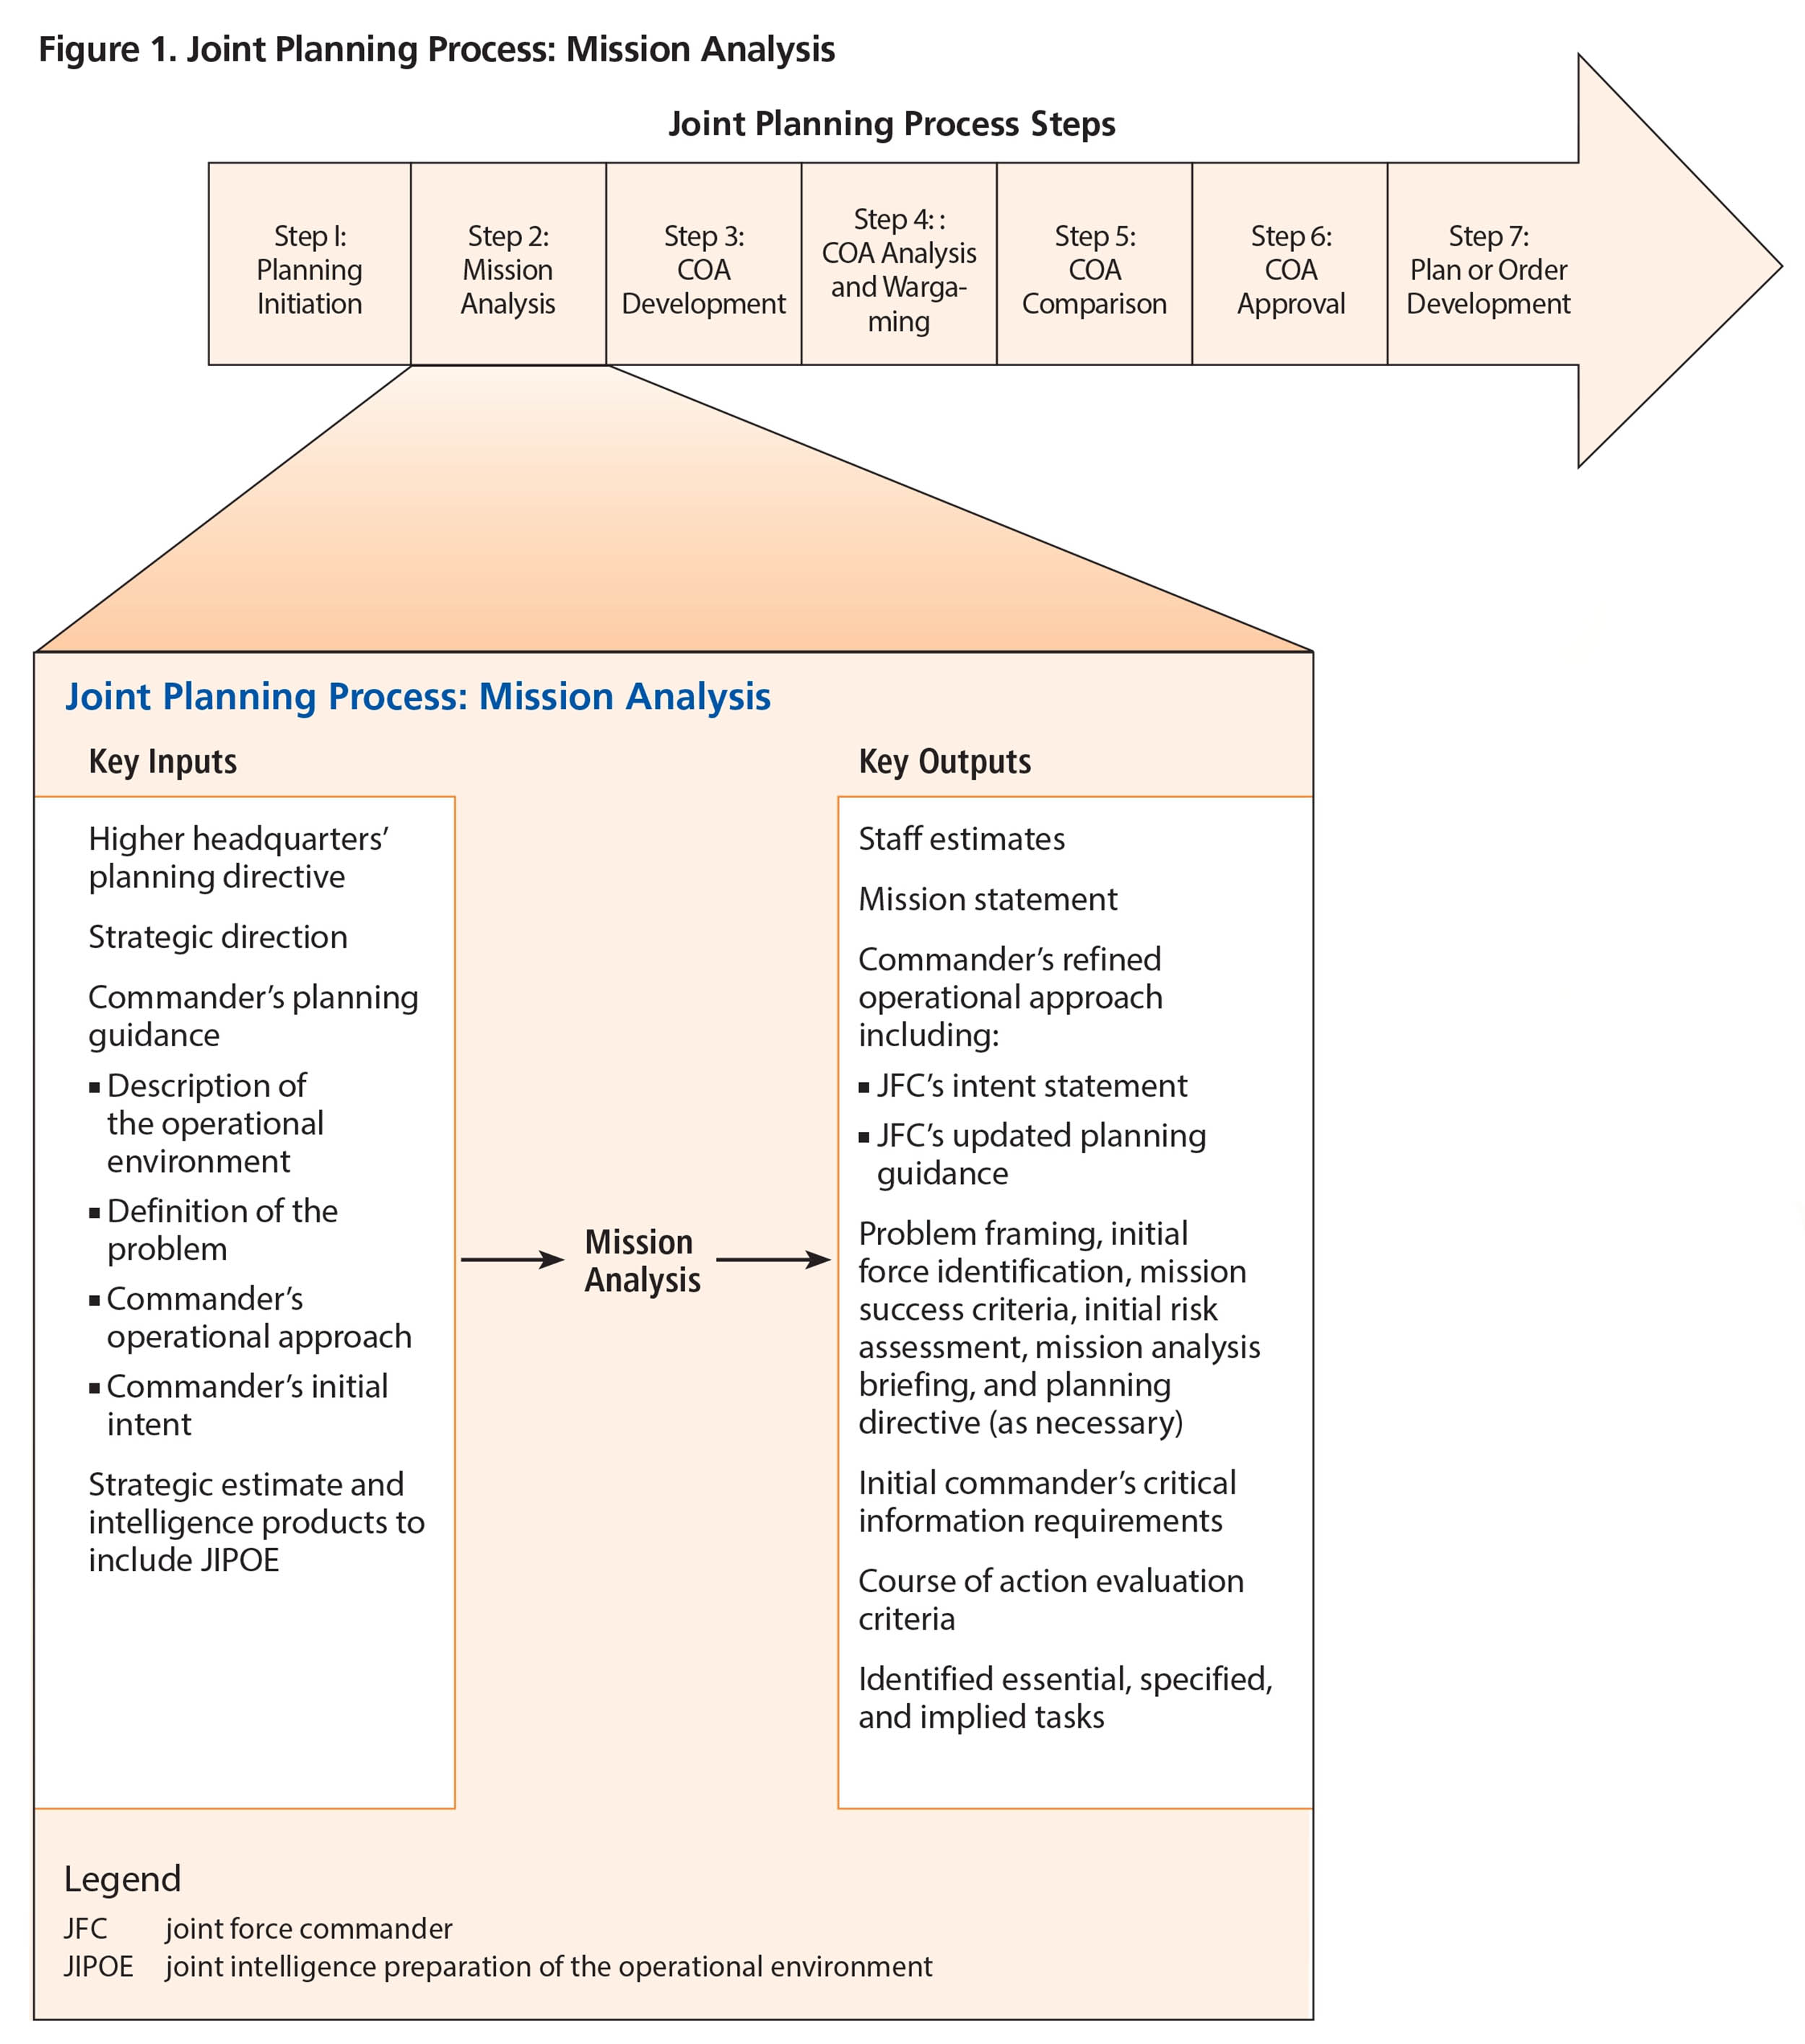 Figure 1. Joint Planning Process: Mission Analysis